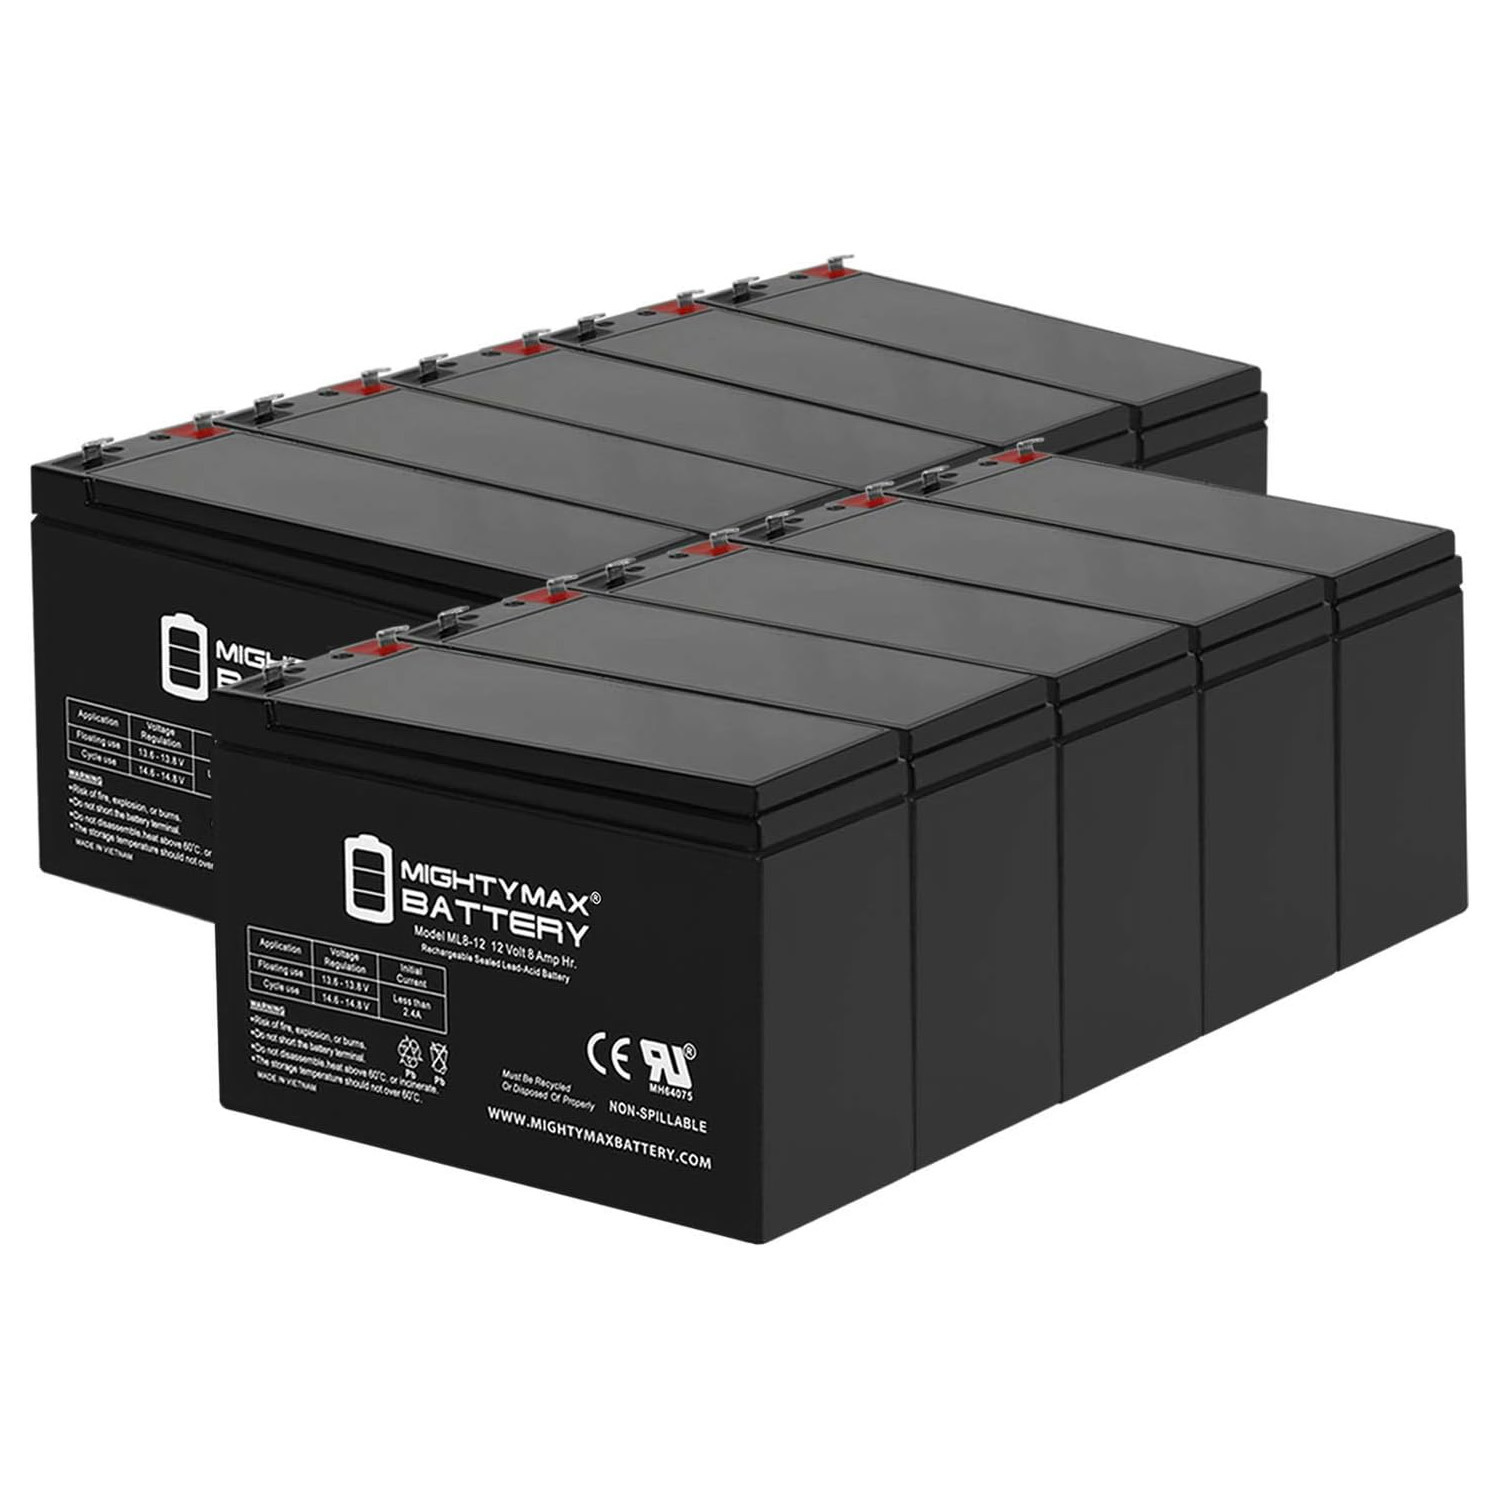 12V 8Ah SLA Replacement Battery compatible with Humminbird 398ci Combo Fishfinder - 10 Pack